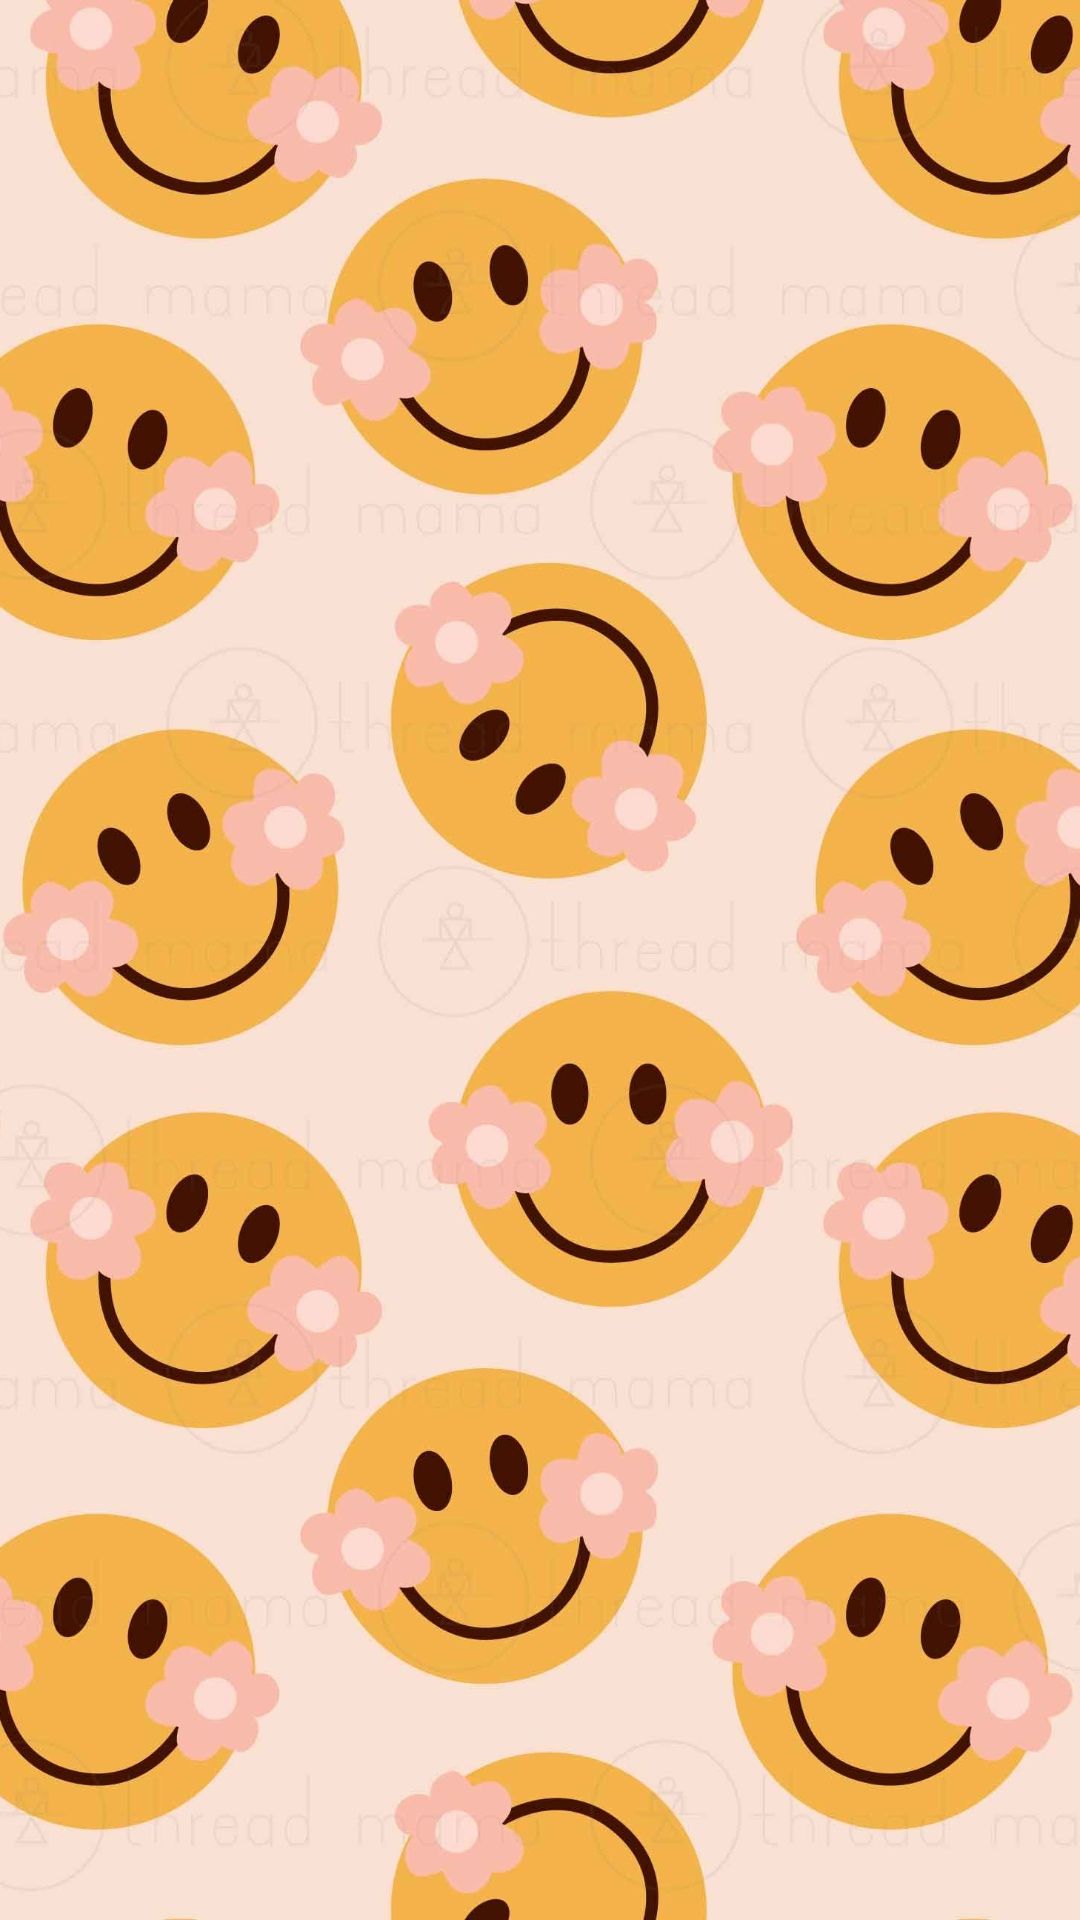 IPhone wallpaper background with smiley faces - Smiley